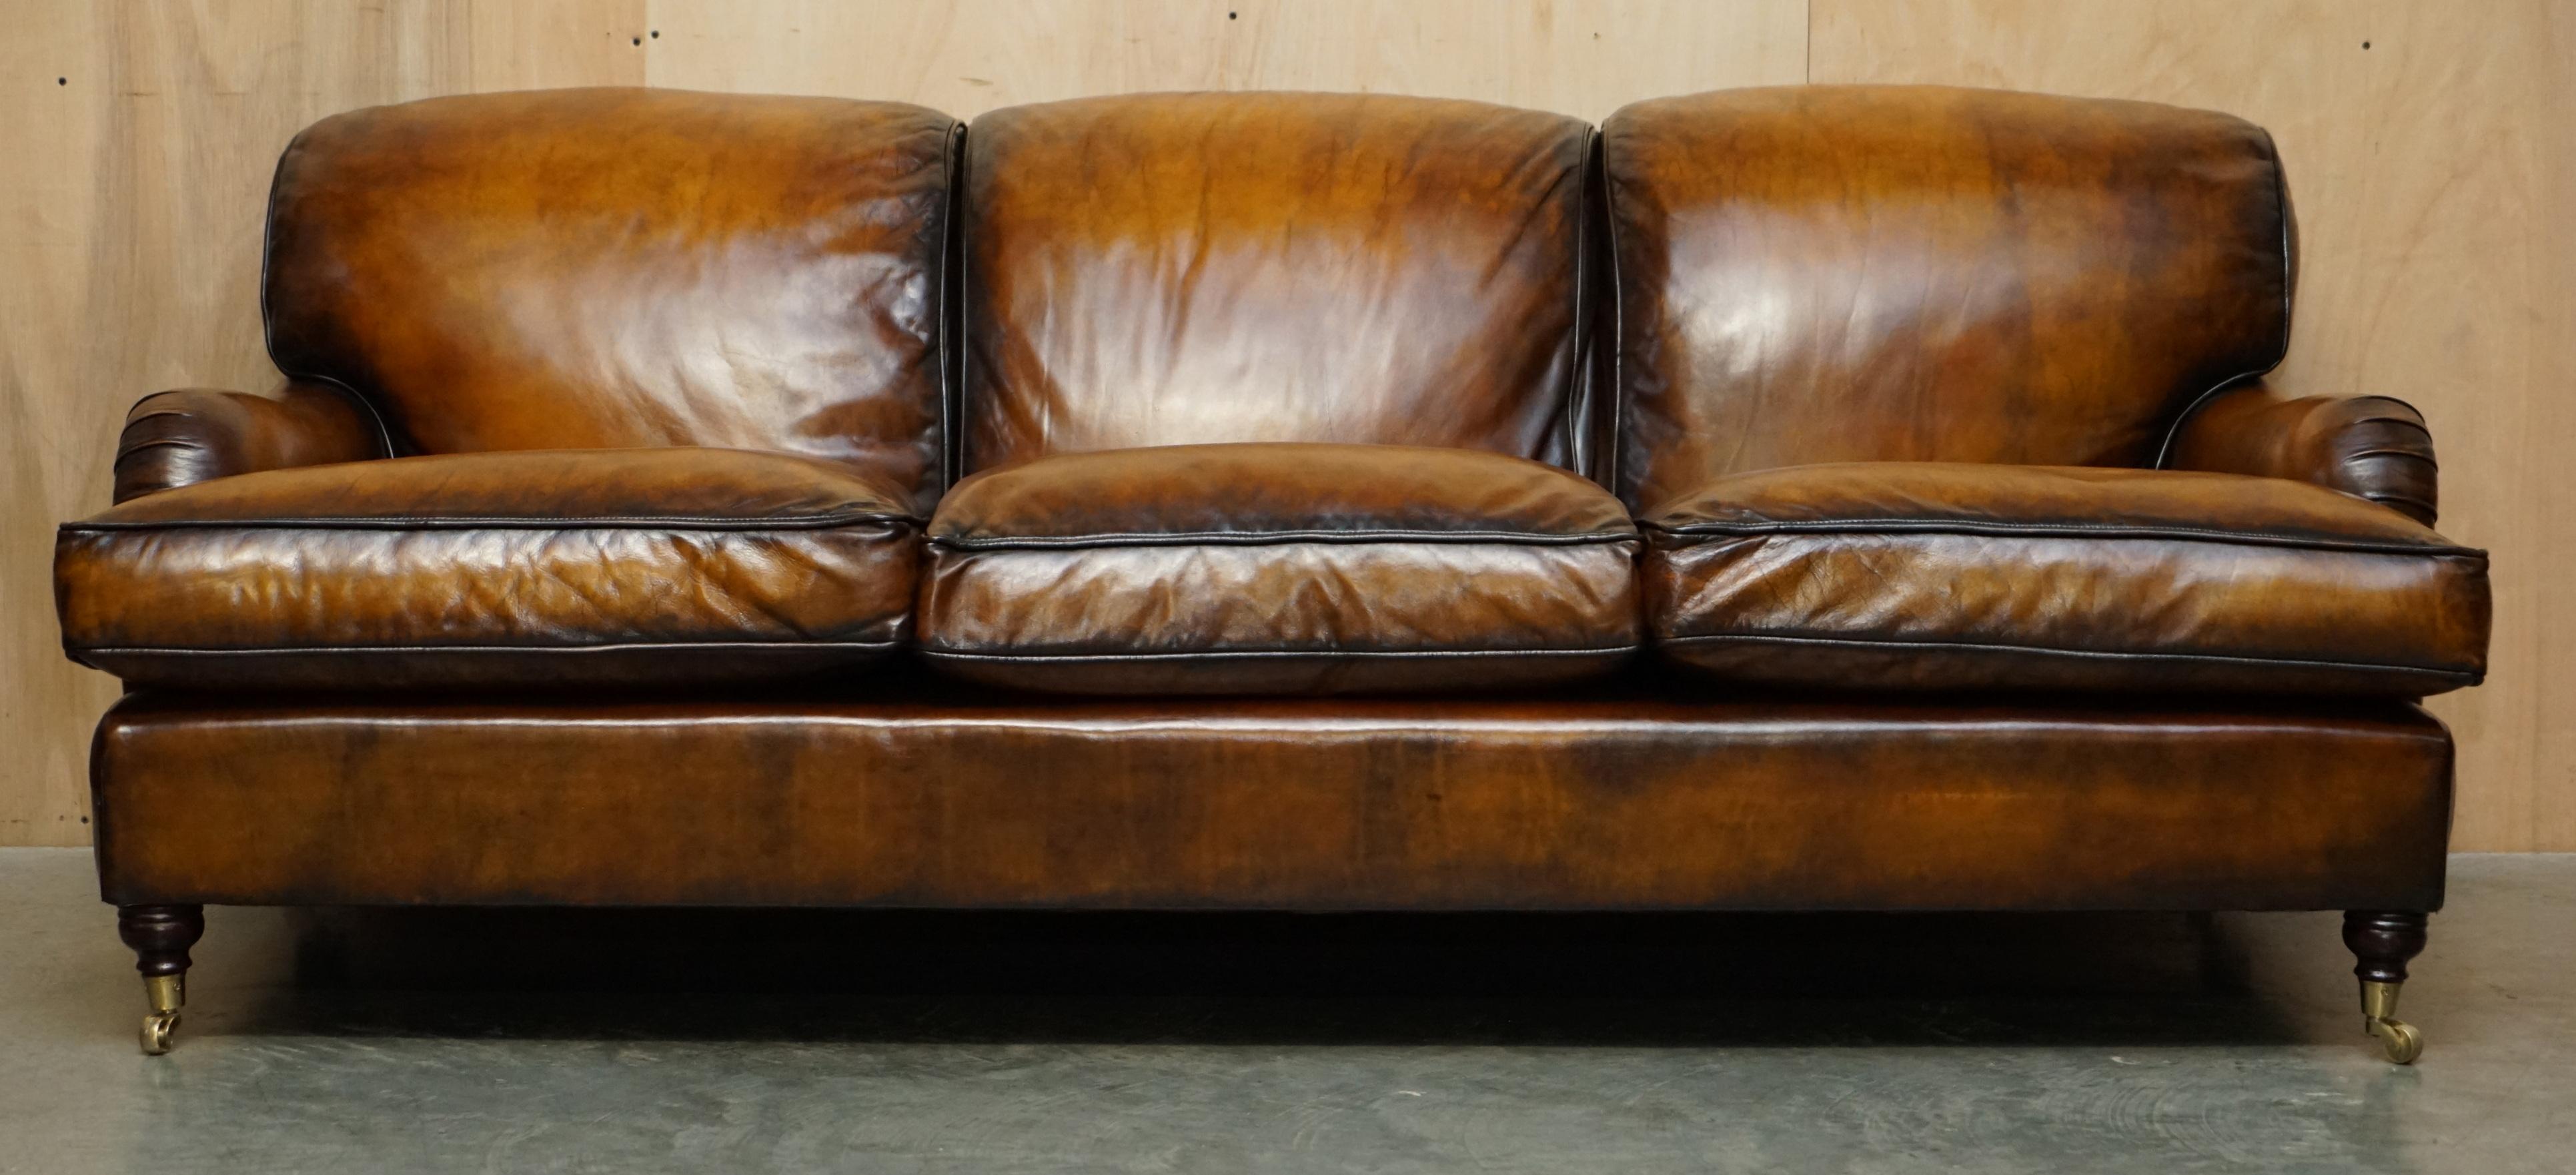 Royal House Antiques

Royal House Antiques is delighted to offer for sale this lovely vintage fully restored hand dyed brown leather Howard & Son’s style three seat sofa with overstuffed feather filled cushions which is part of a suite

Please note